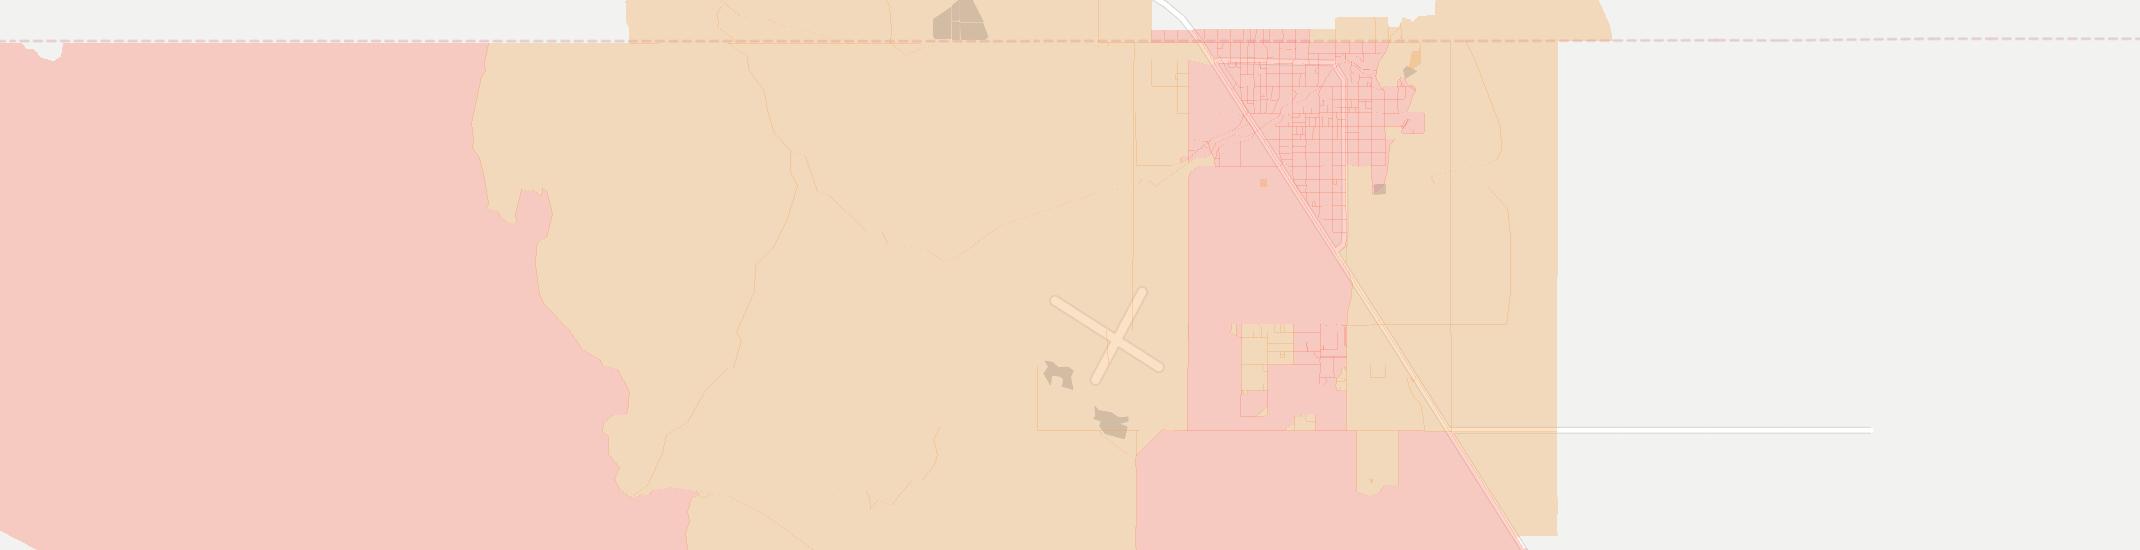 Colorado City Internet Competition Map. Click for interactive map